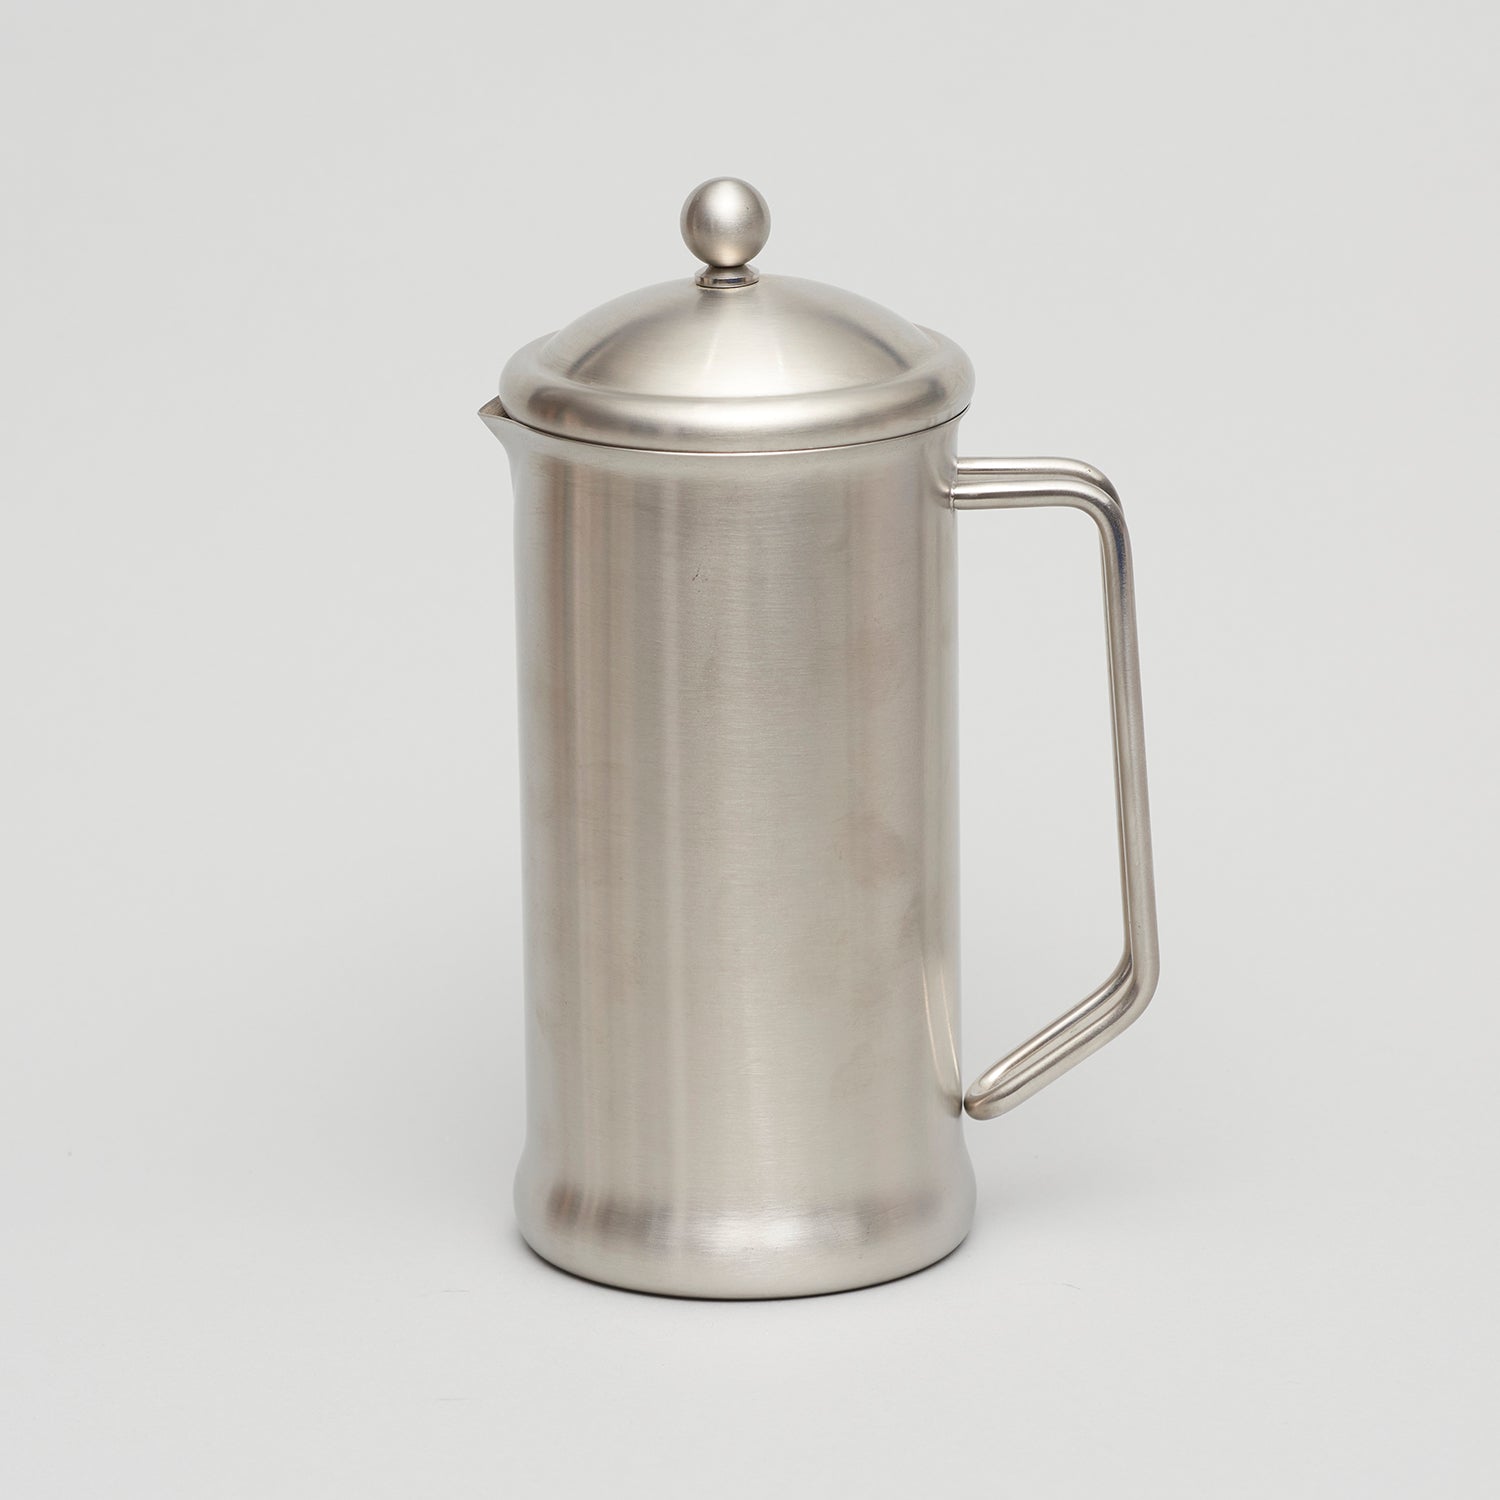 Image shows a stylish brushed stainless steel cafetiere.